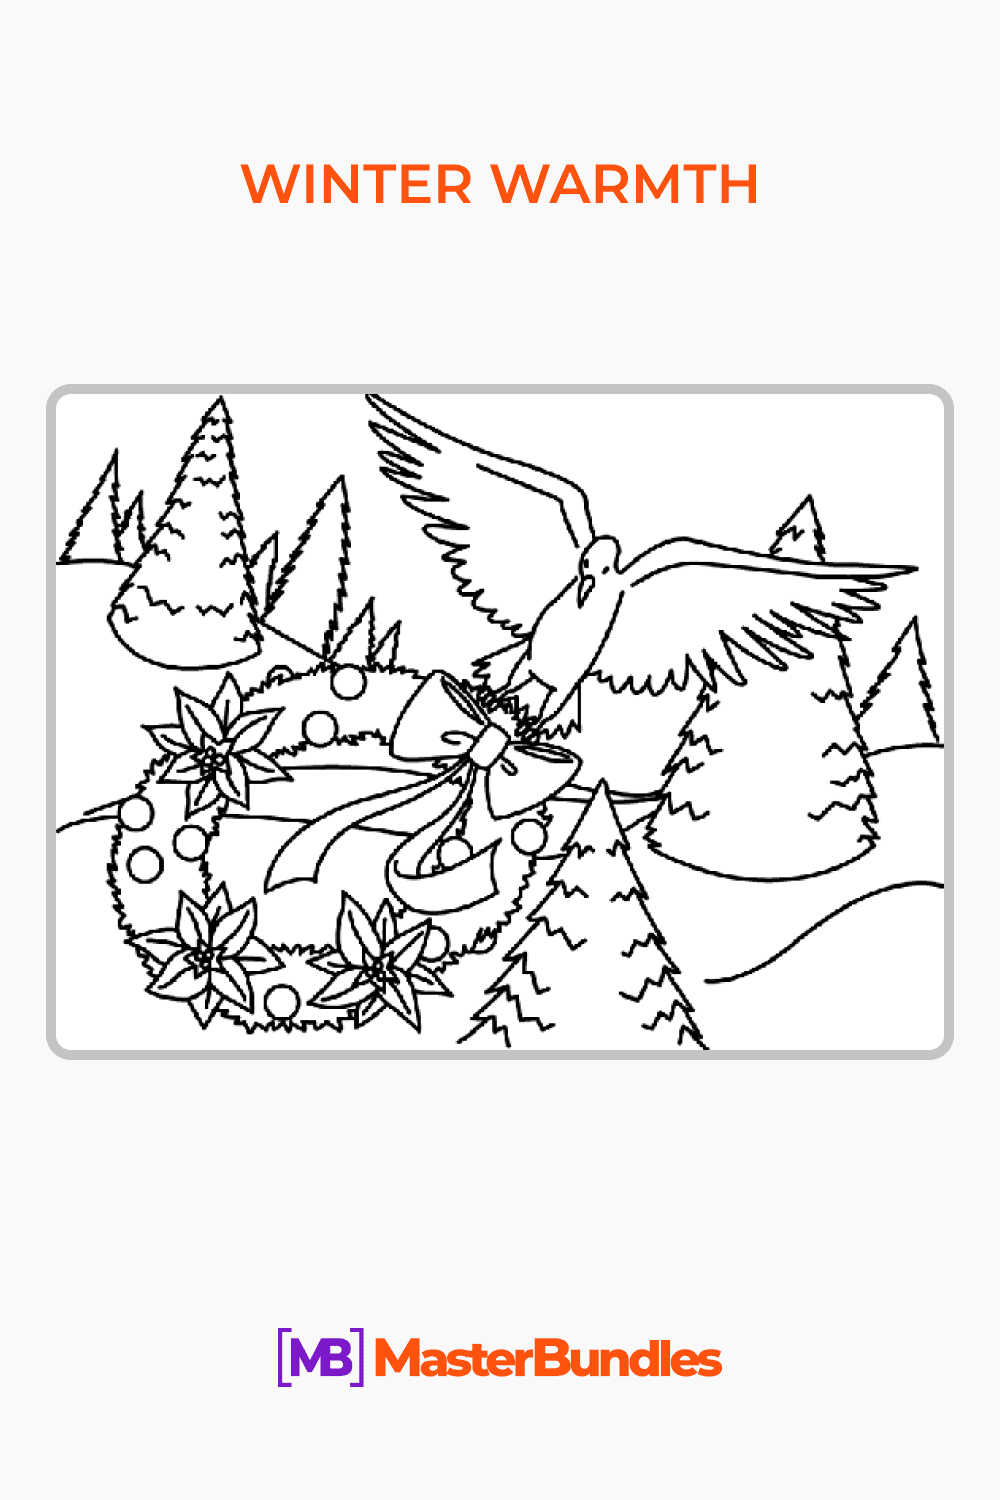 winter warmth coloring page Pinterest image.